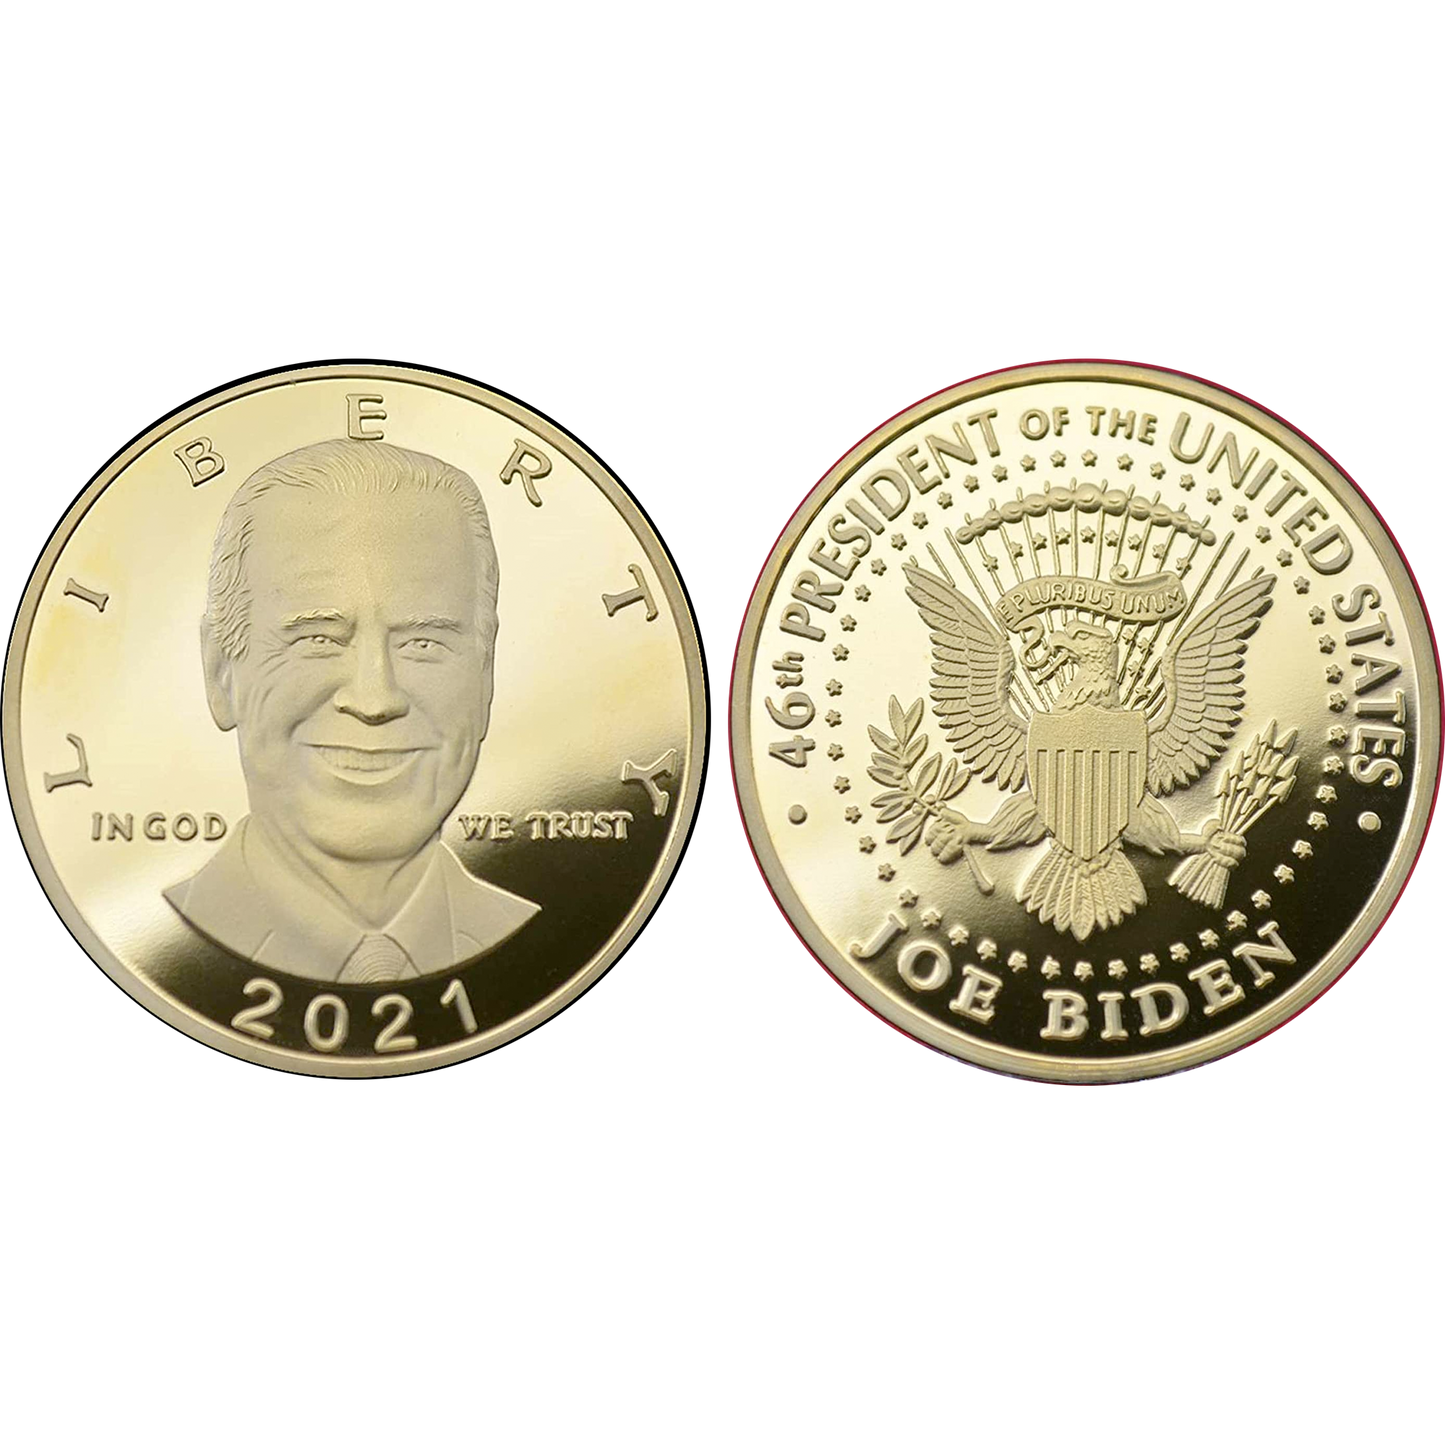 BL13-004 President Joe Biden 24KT Gold plated 2021 LIBERTY Challenge Coin 46th President of The United States